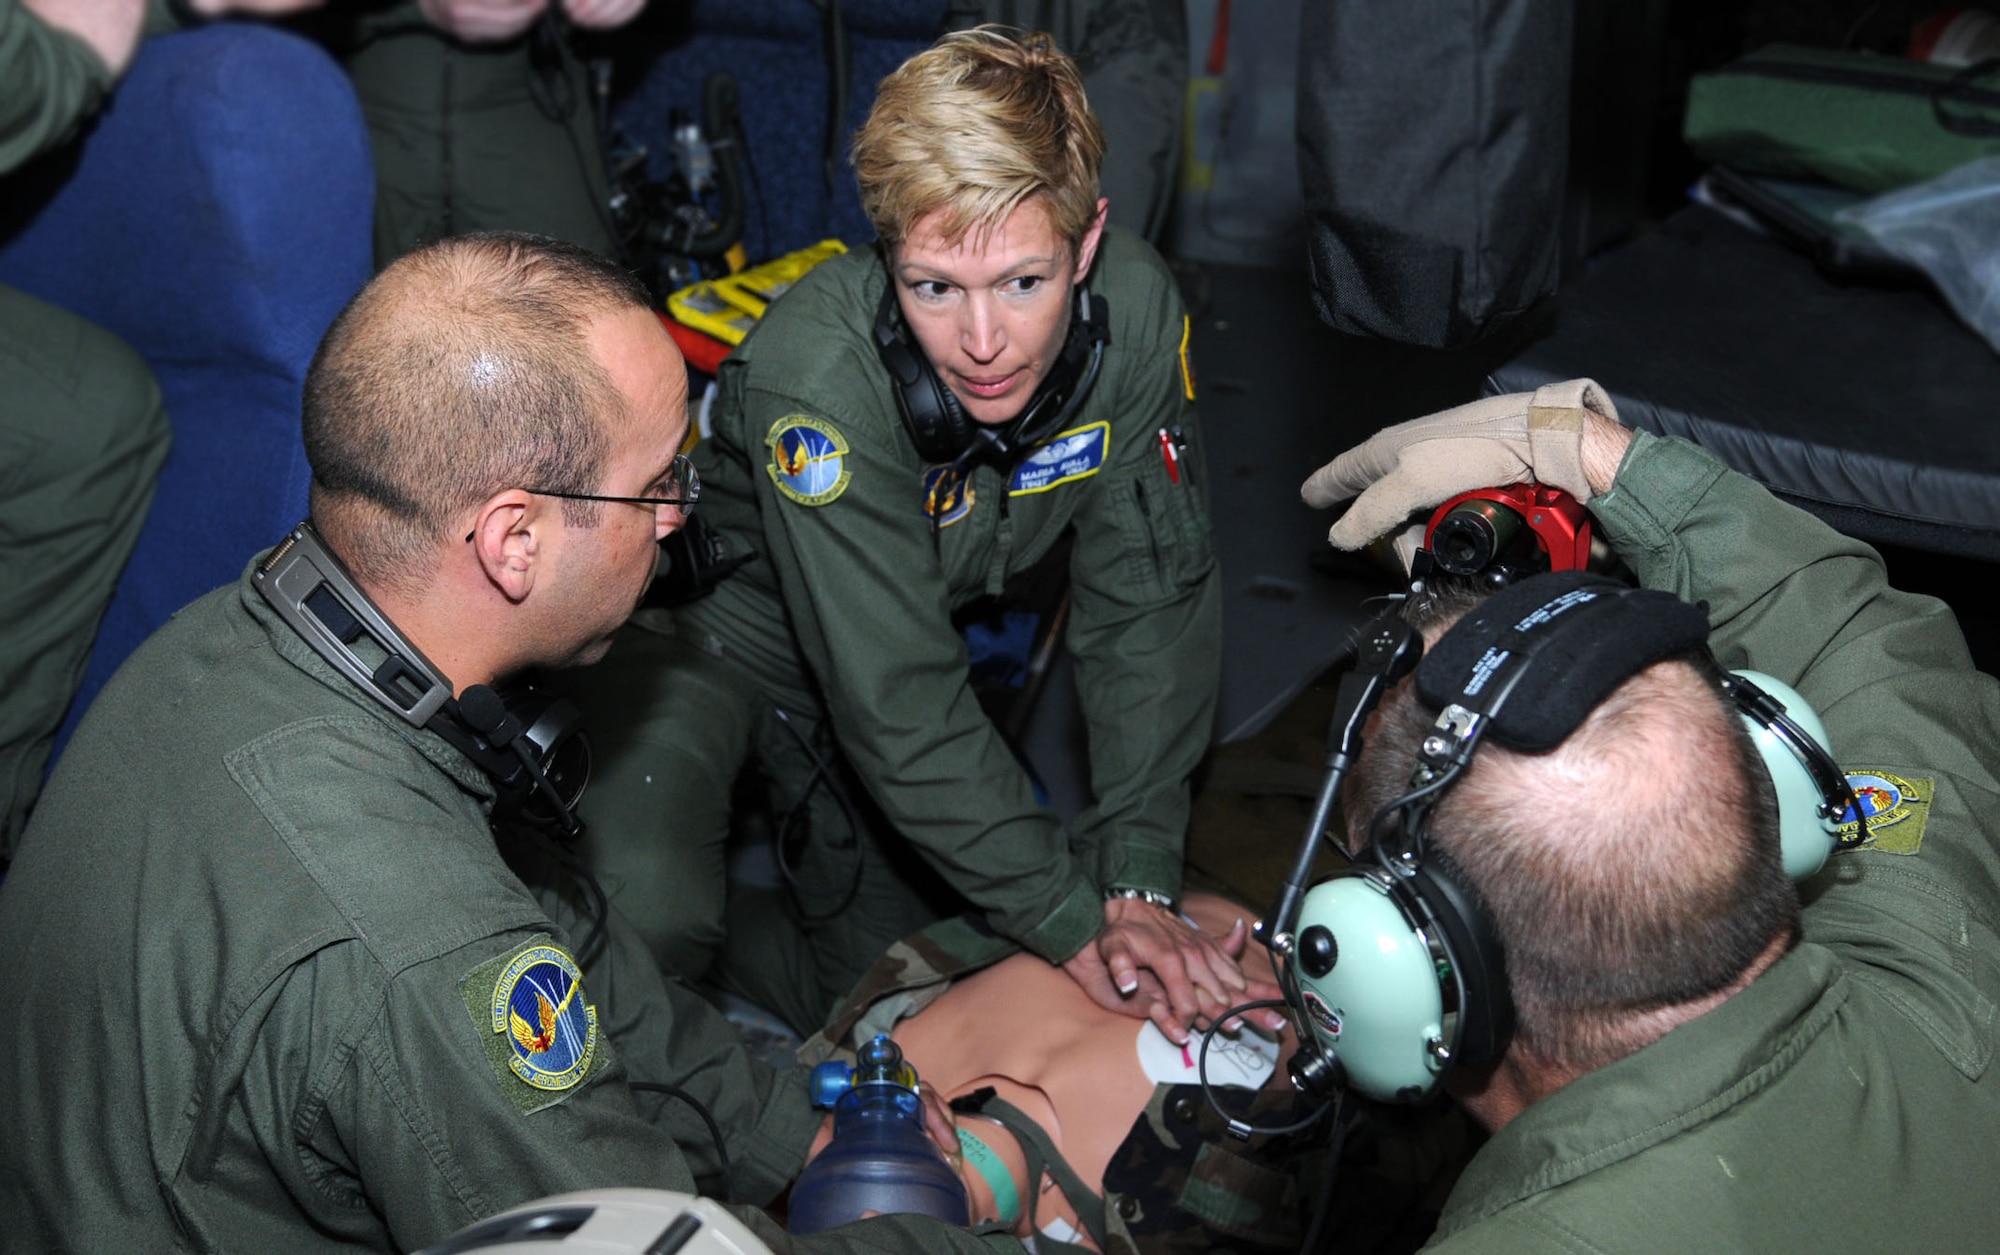 Aeromedical technicians Tech. Sgt. Maria Aval and Staff Sgt. F. Javier Magana, both aeromedical technicians with the 45th AES, MacDill AFB, Florida, administer first aid to a simulated cardiac arrest patient during a three-day training mission held Dec. 12, 2014. To stay proficient at their lifesaving skills, the technicians routinely climb aboard a MacDill based KC-135 to fine tune their caregiving skills. (U.S. Air force photo/Tech. Sgt. Peter Dean/released)